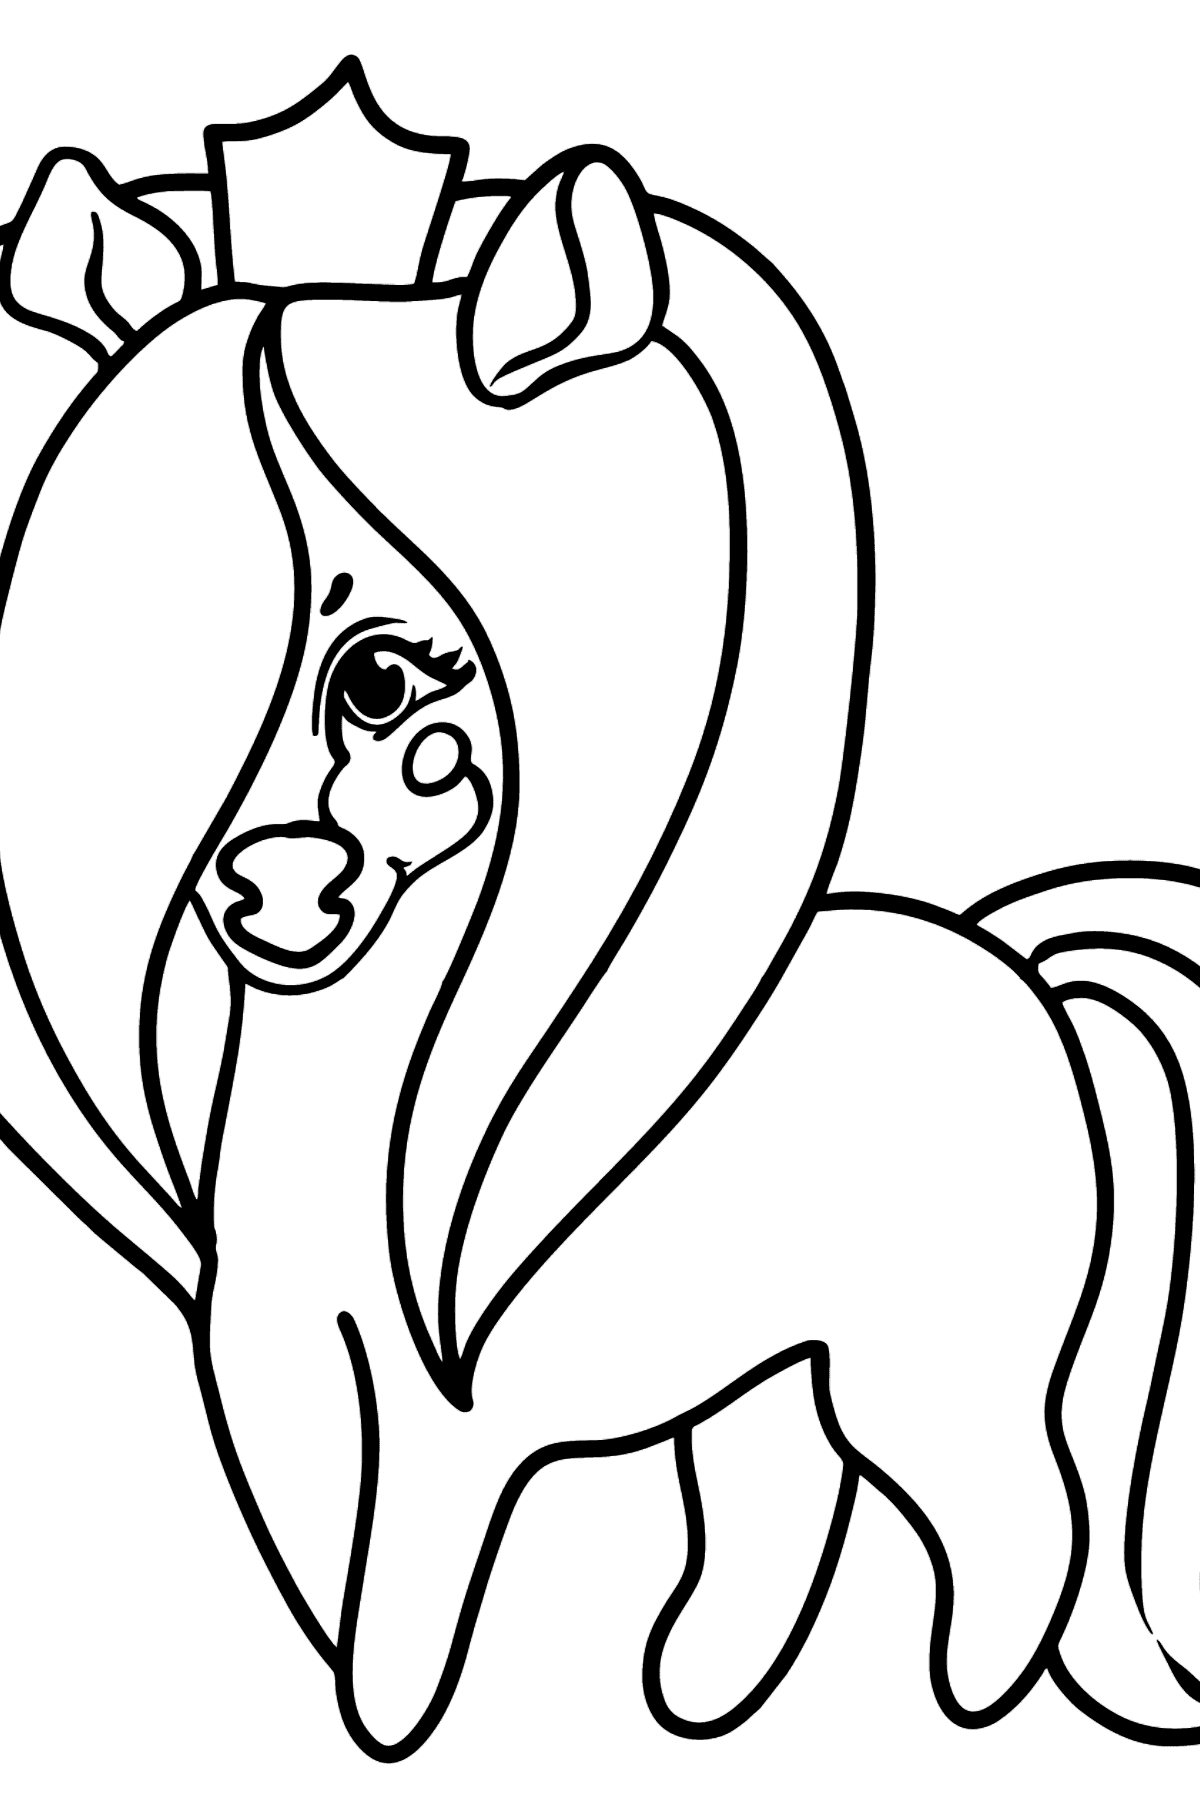 Pony Princess coloring page - Coloring Pages for Kids